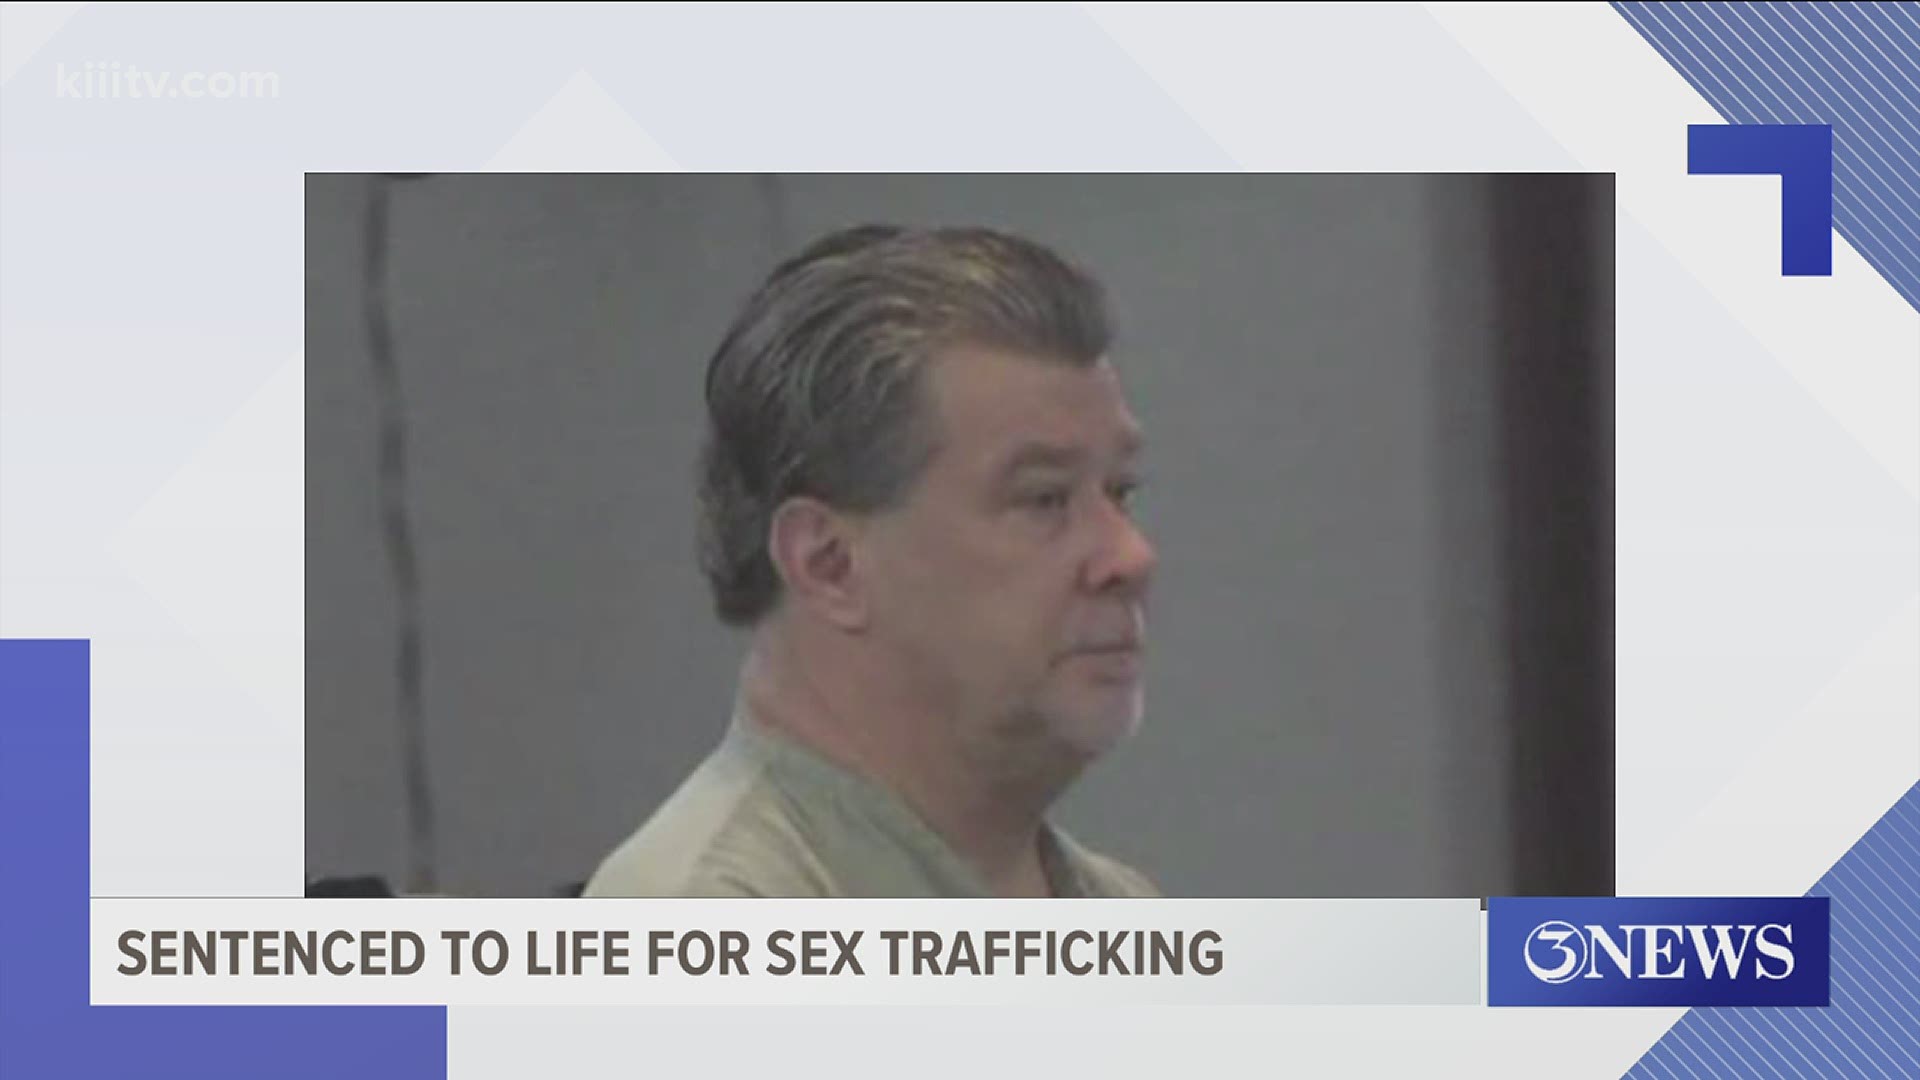 David Keith Wills was sentenced to life in federal prison Tuesday for sex trafficking of a minor female.